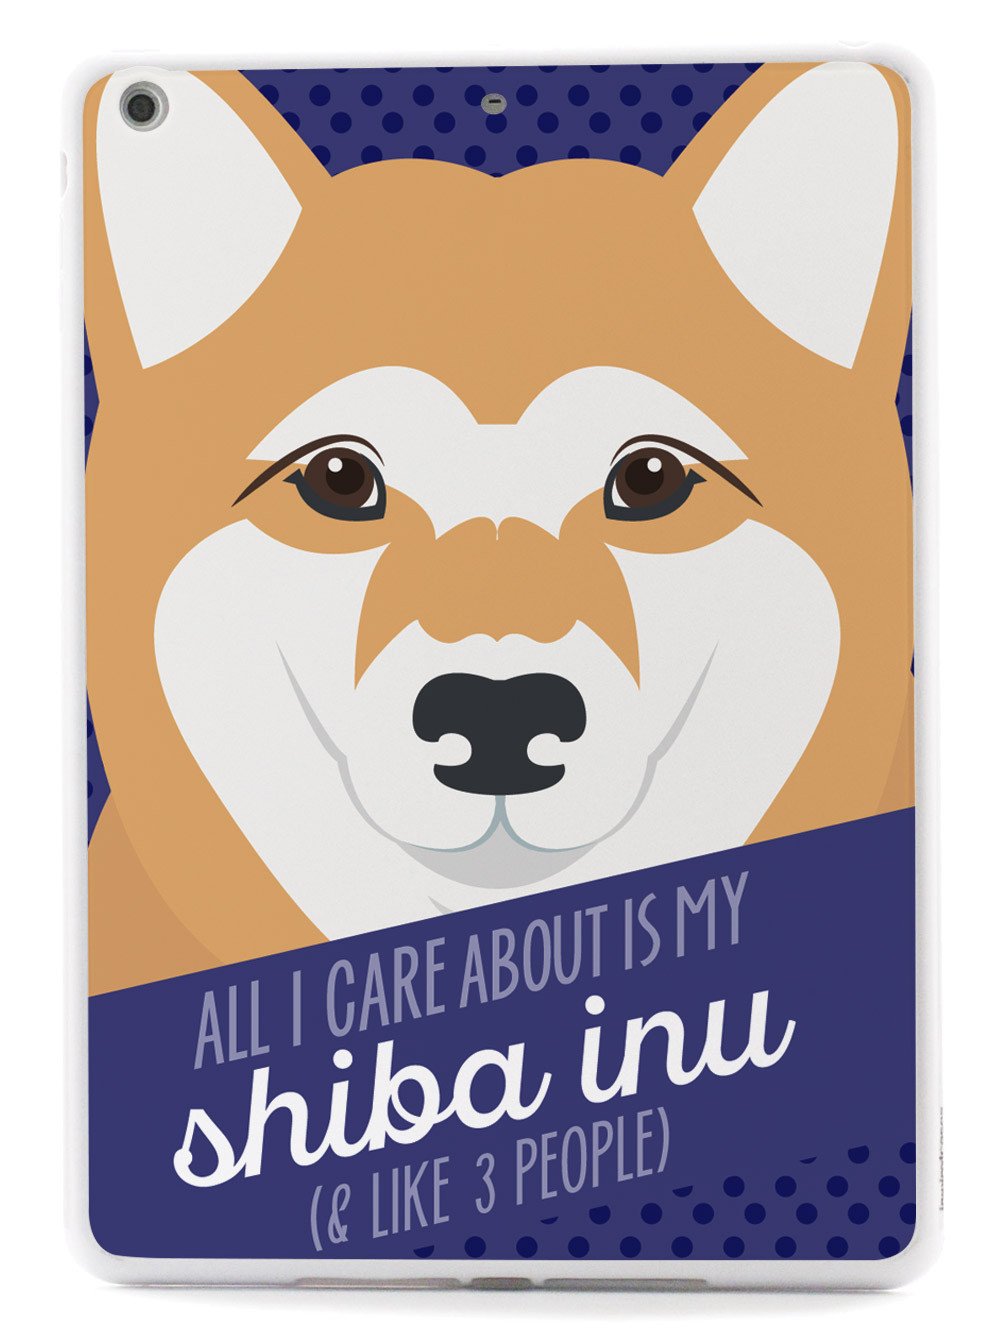 All I Care About Is My Shiba Inu Case